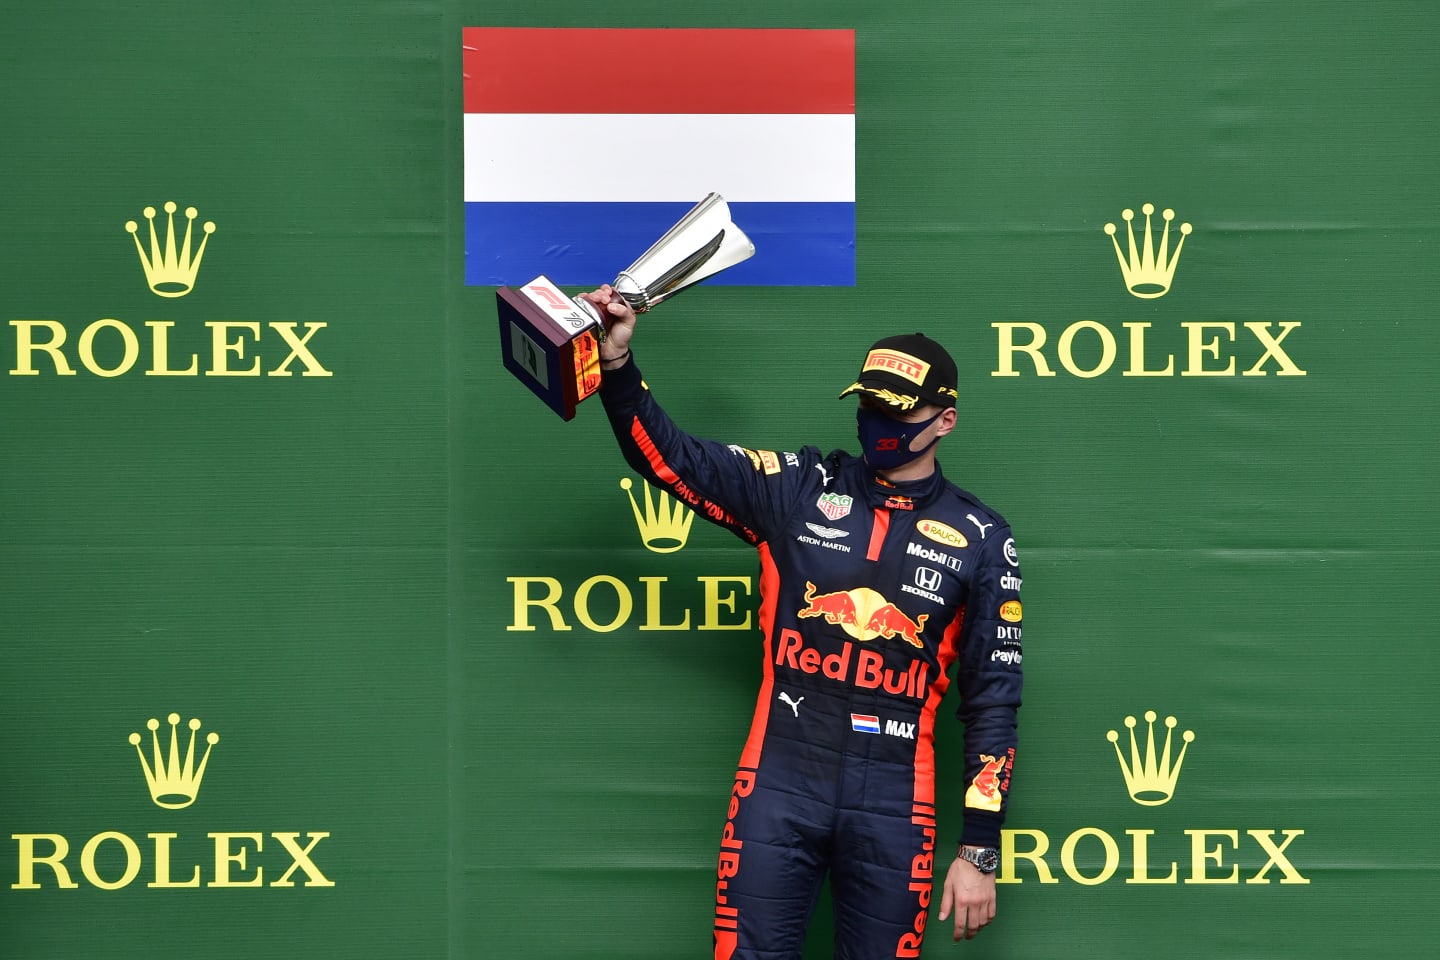 SPA, BELGIUM - AUGUST 30: Third placed Max Verstappen of Netherlands and Red Bull Racing celebrates on the podium during the F1 Grand Prix of Belgium at Circuit de Spa-Francorchamps on August 30, 2020 in Spa, Belgium. (Photo by John Thuys/Pool via Getty Images)